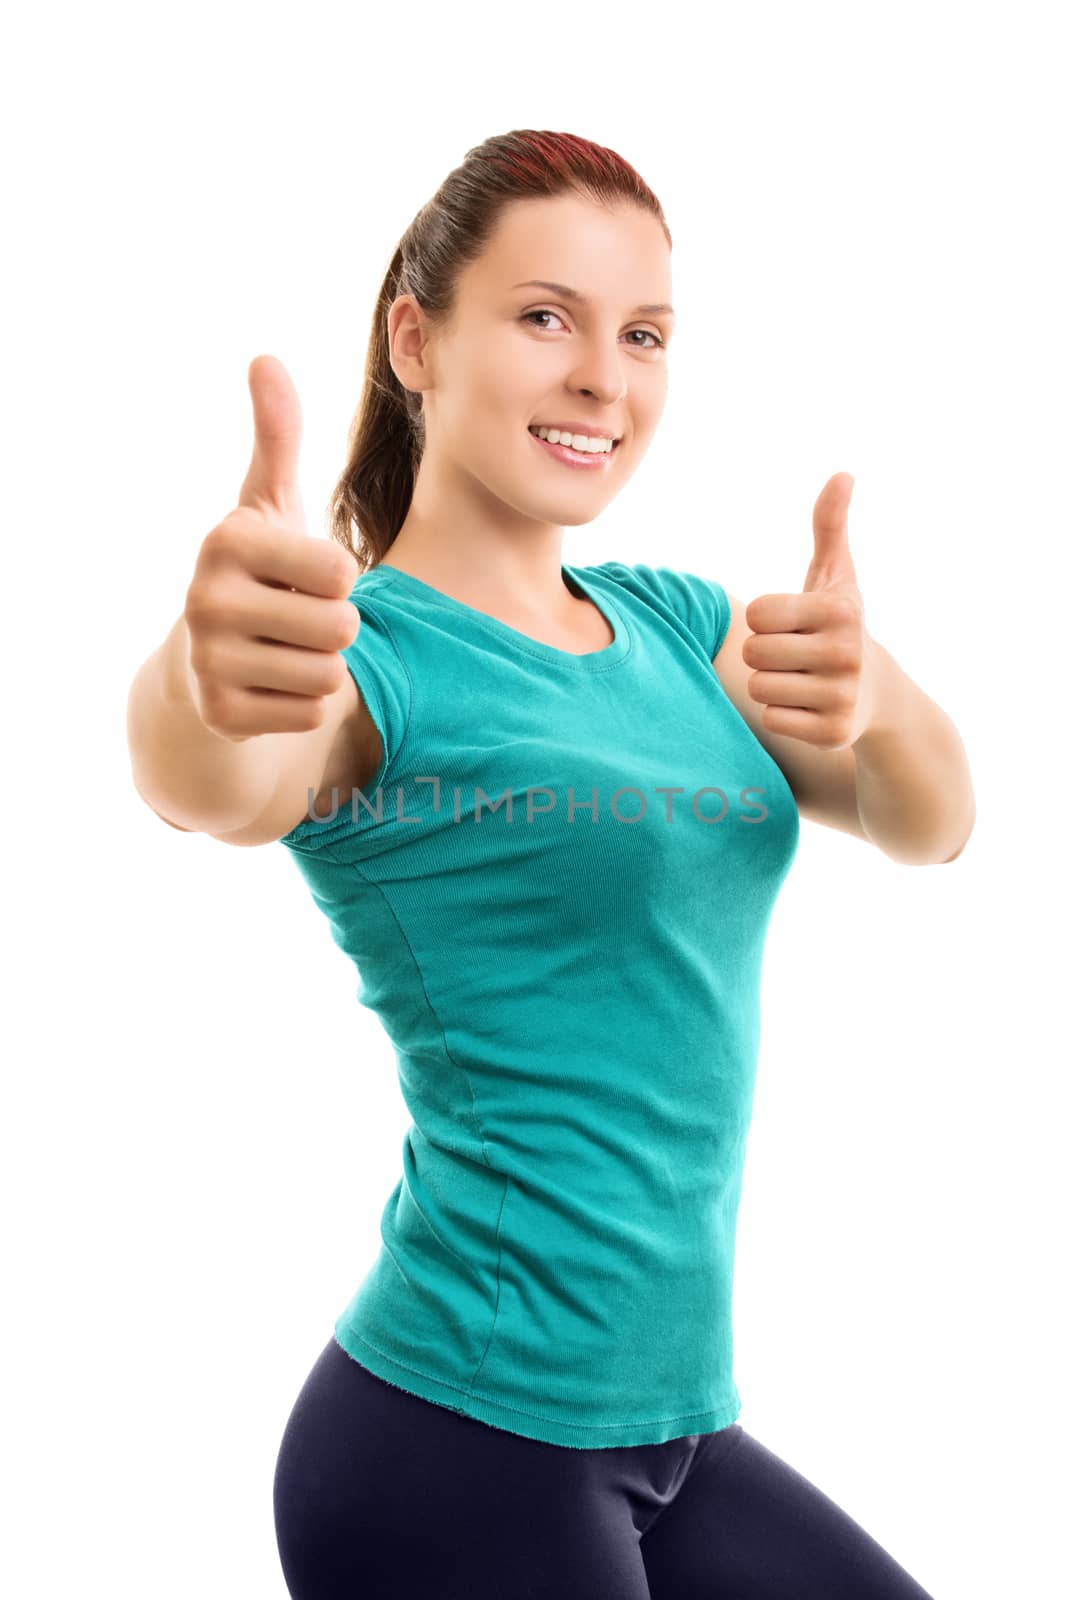 Slim and fit. You should try it. Beautiful smiling young girl in fitness clothes giving thumbs up, isolated on white background.